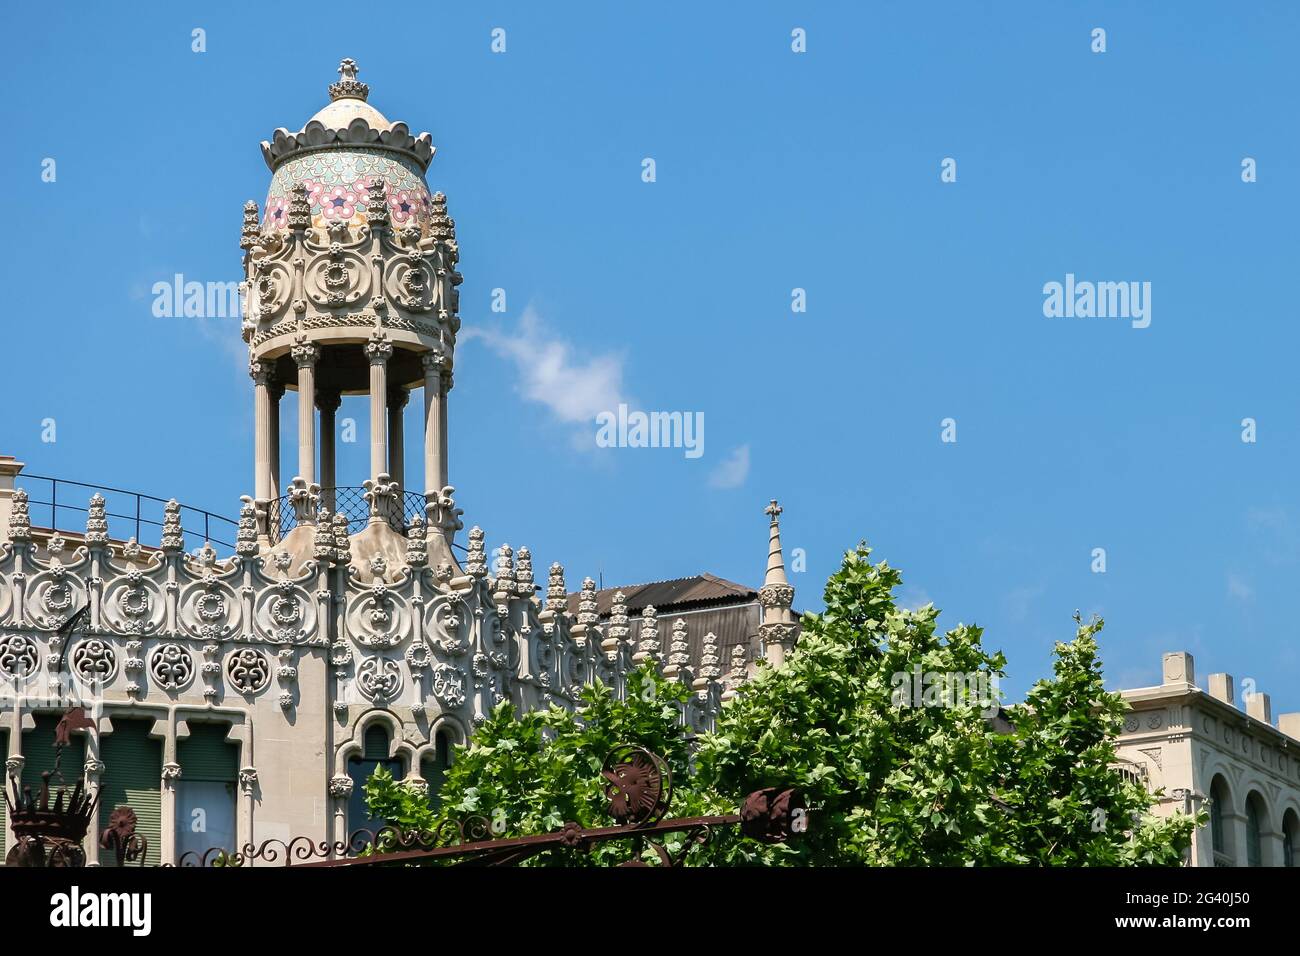 A strange tower or turret  in Barcelona Stock Photo